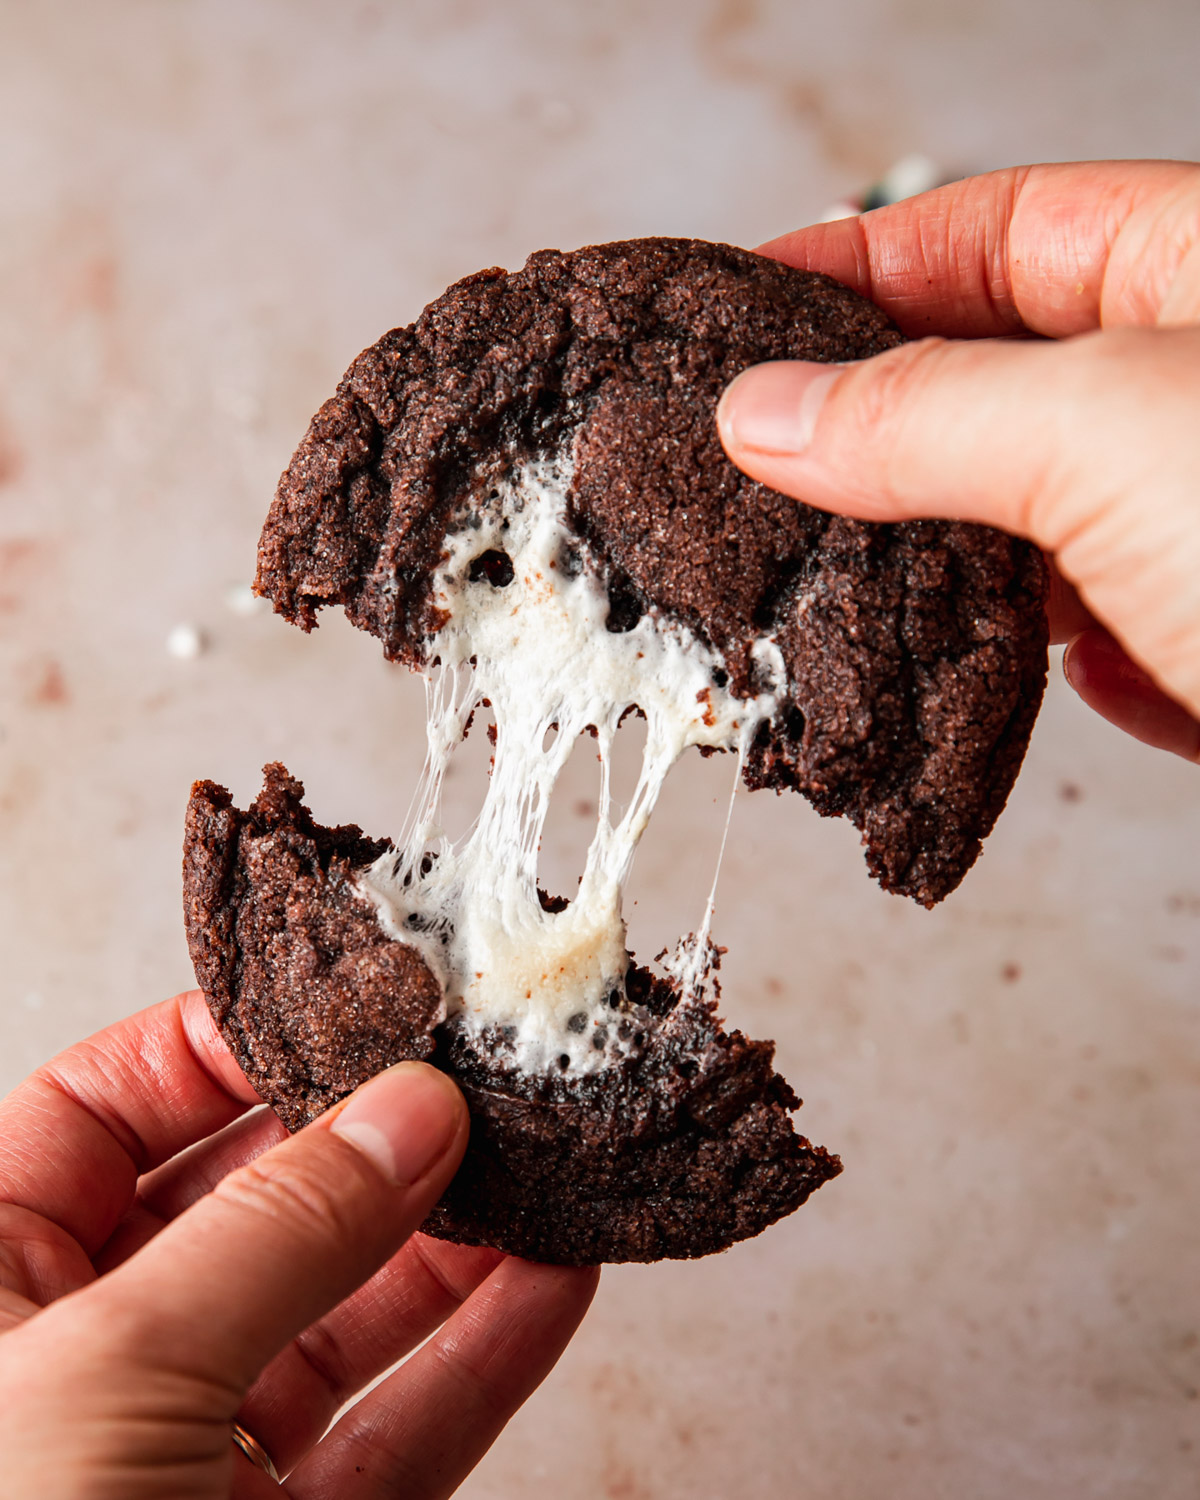 A hot chocolate cookie being pulled apart with gooey marshmallow in the center